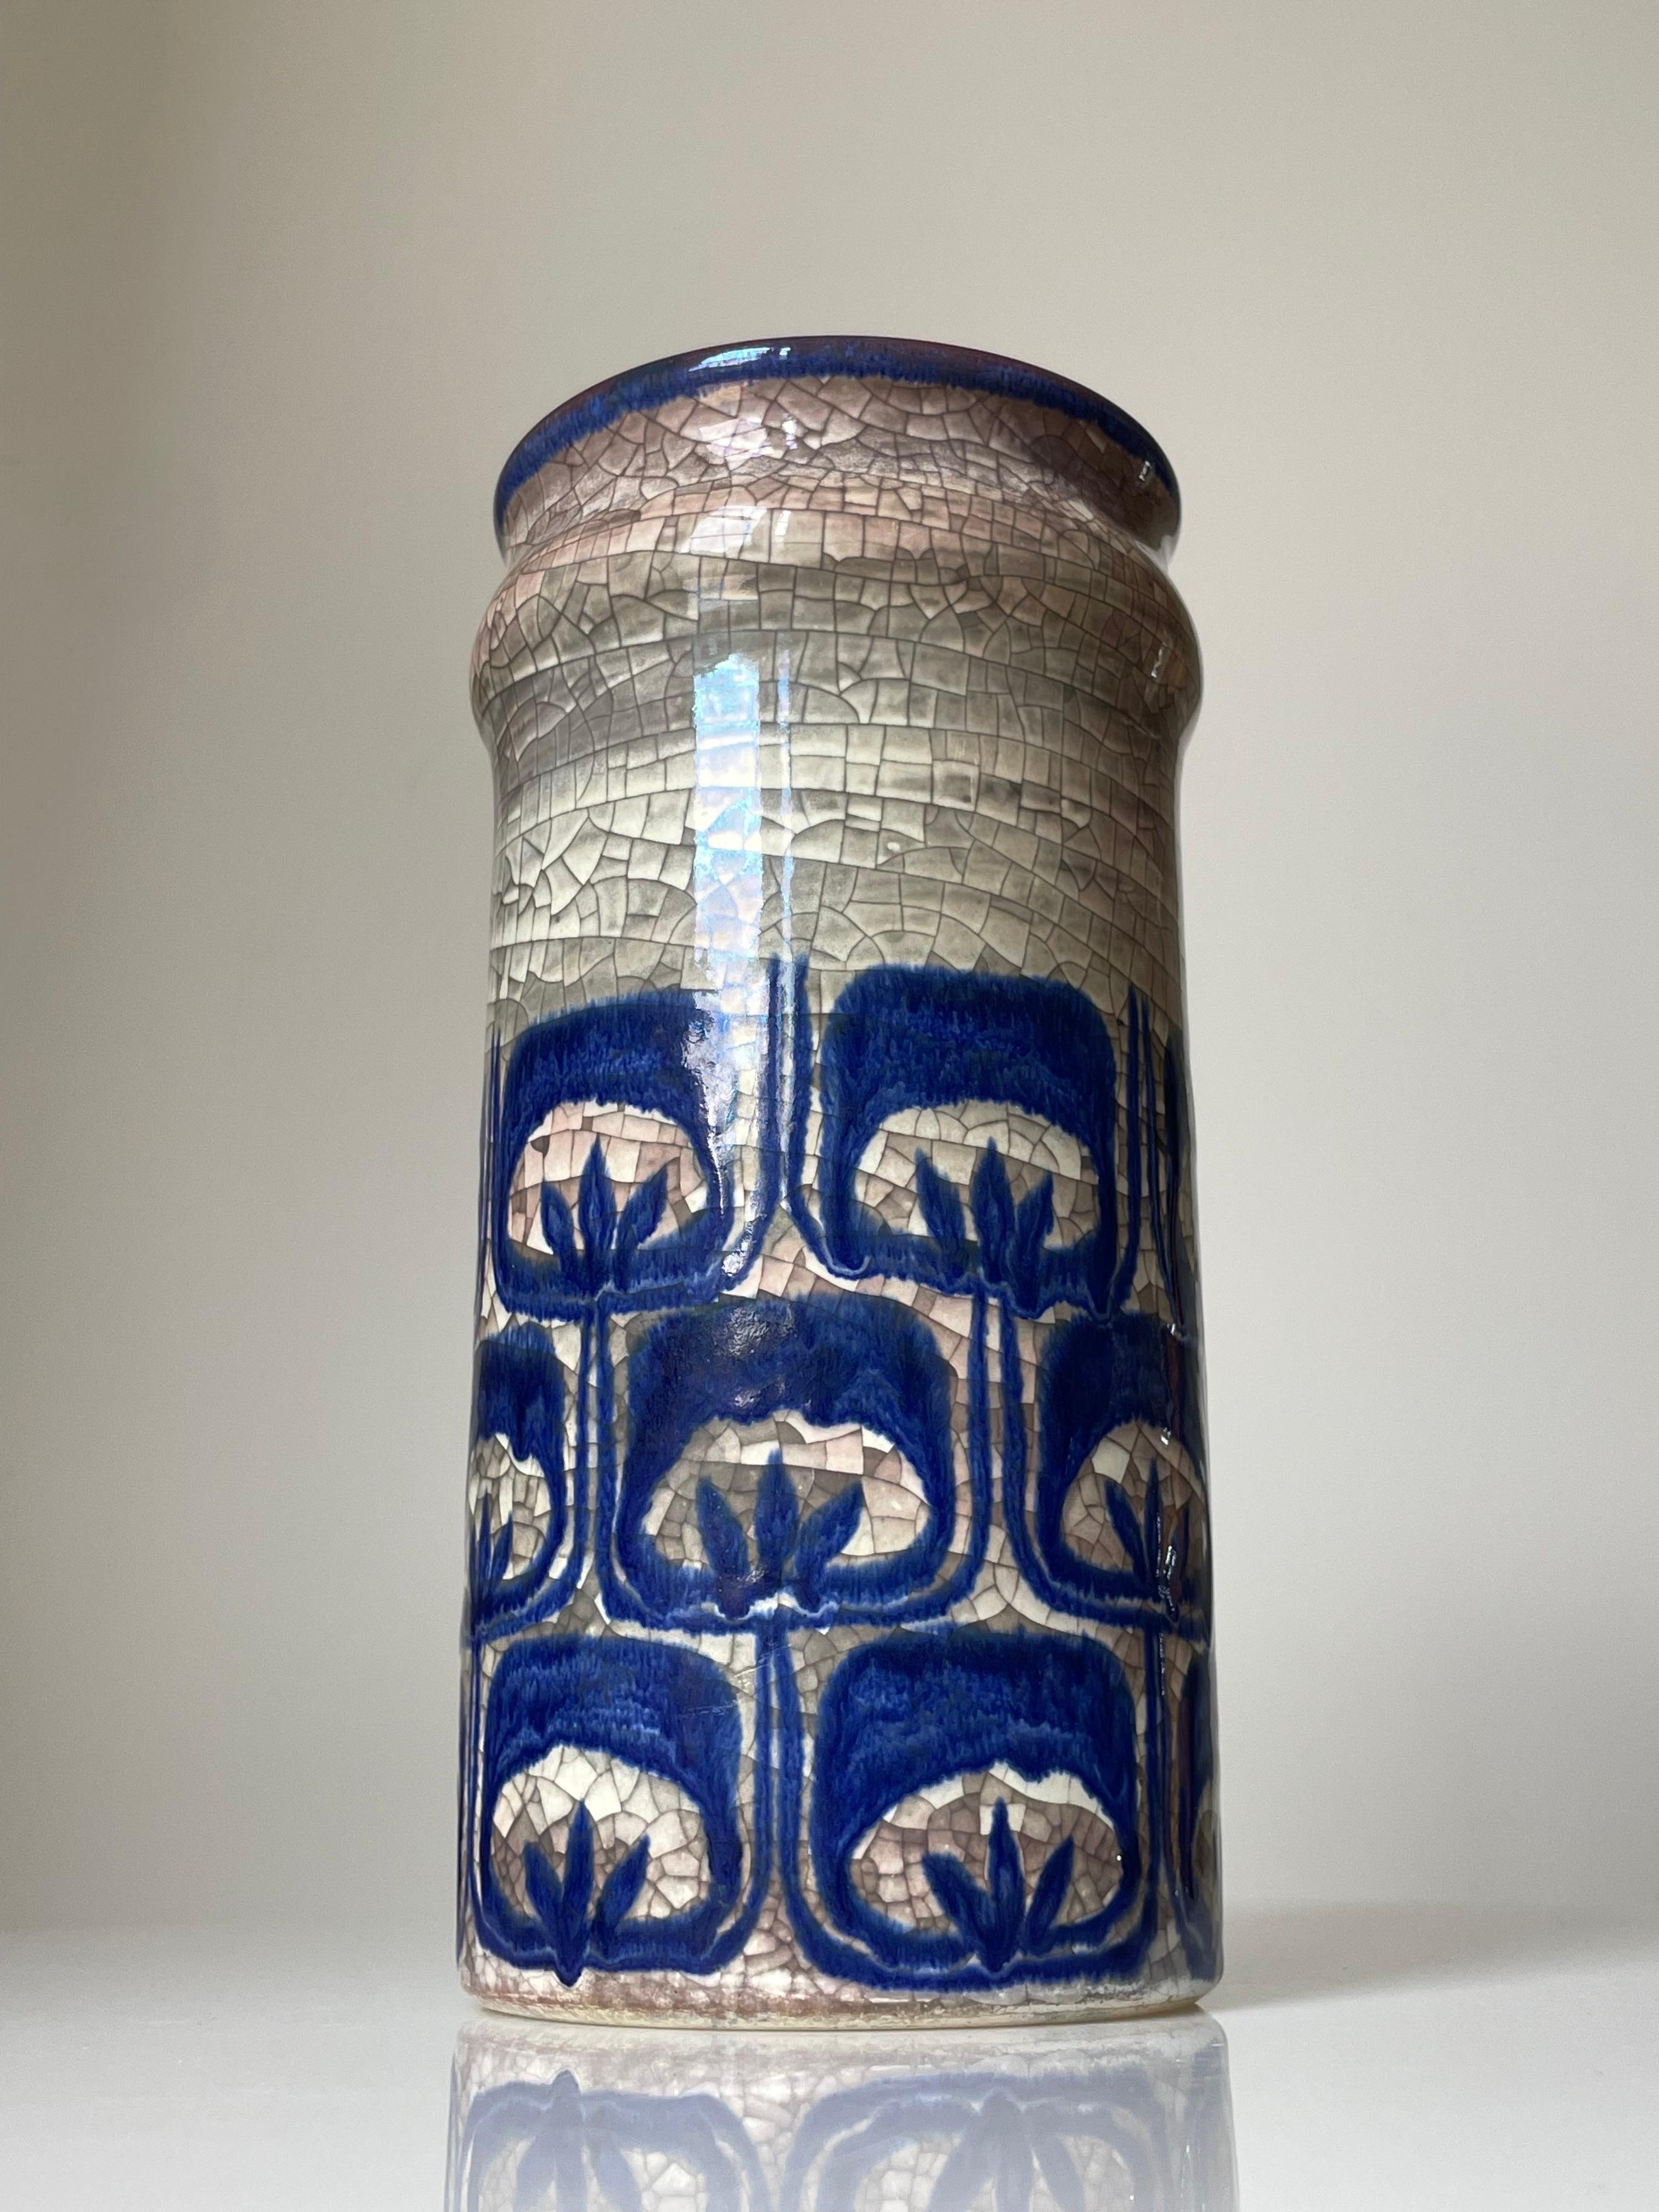 Danish midcentury modern ceramic vase by Marianne Starck for Michael Andersen & Son. Blue stylized floral decor around the belly of the grey cylinder shape with persia crackle glaze with slight burgundy tint. The inside glazed in burgundy, blue and